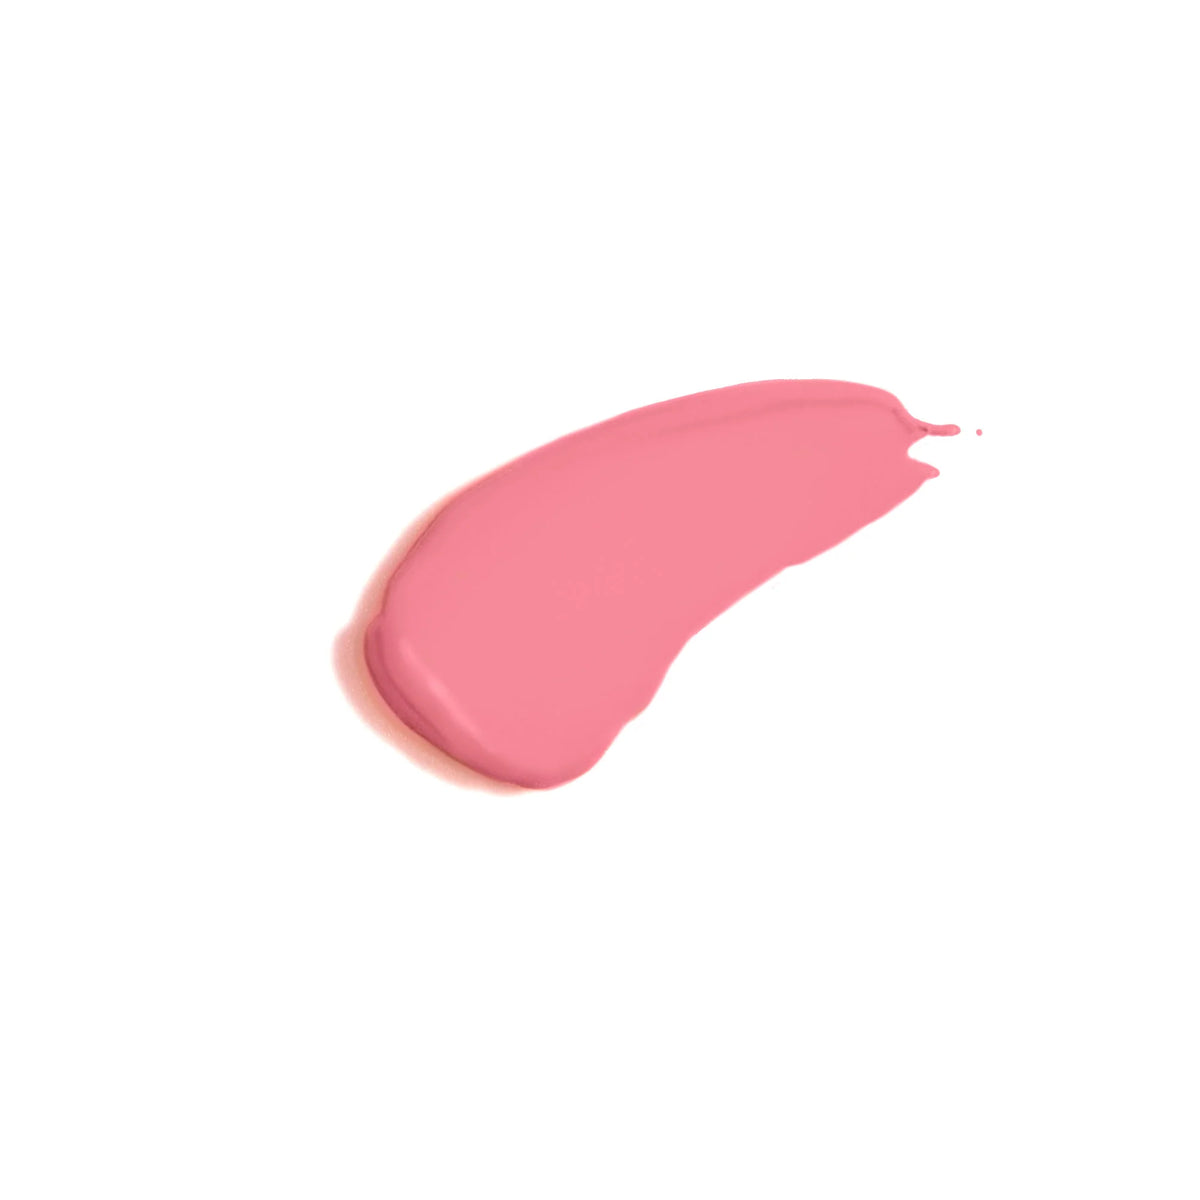 Tok beauty lip tonic in heart pink color swatch